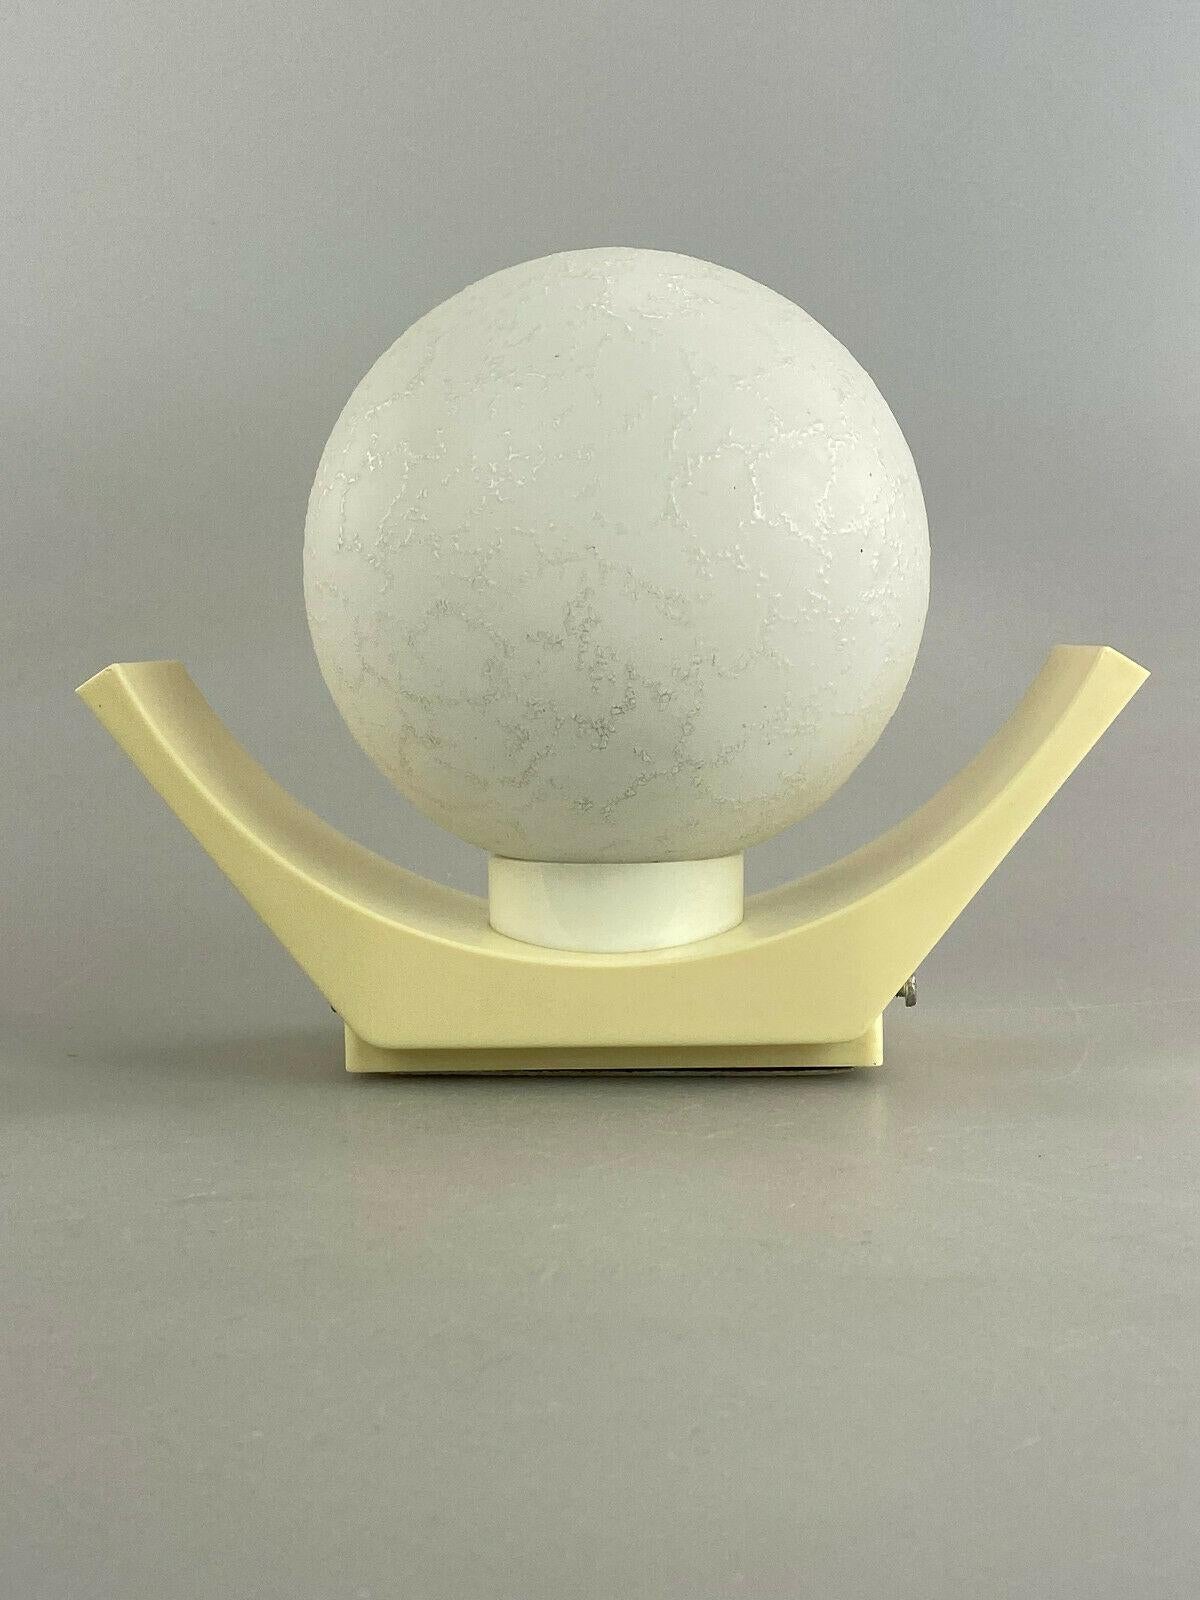 60s 70s wall lamp ball lamp lamp light space age design 60s 70s

Object: wall lamp

Manufacturer:

Condition: good

Age: around 1960-1970

Dimensions:

21.5cm x 13cm x 17cm

Other notes:

The pictures serve as part of the